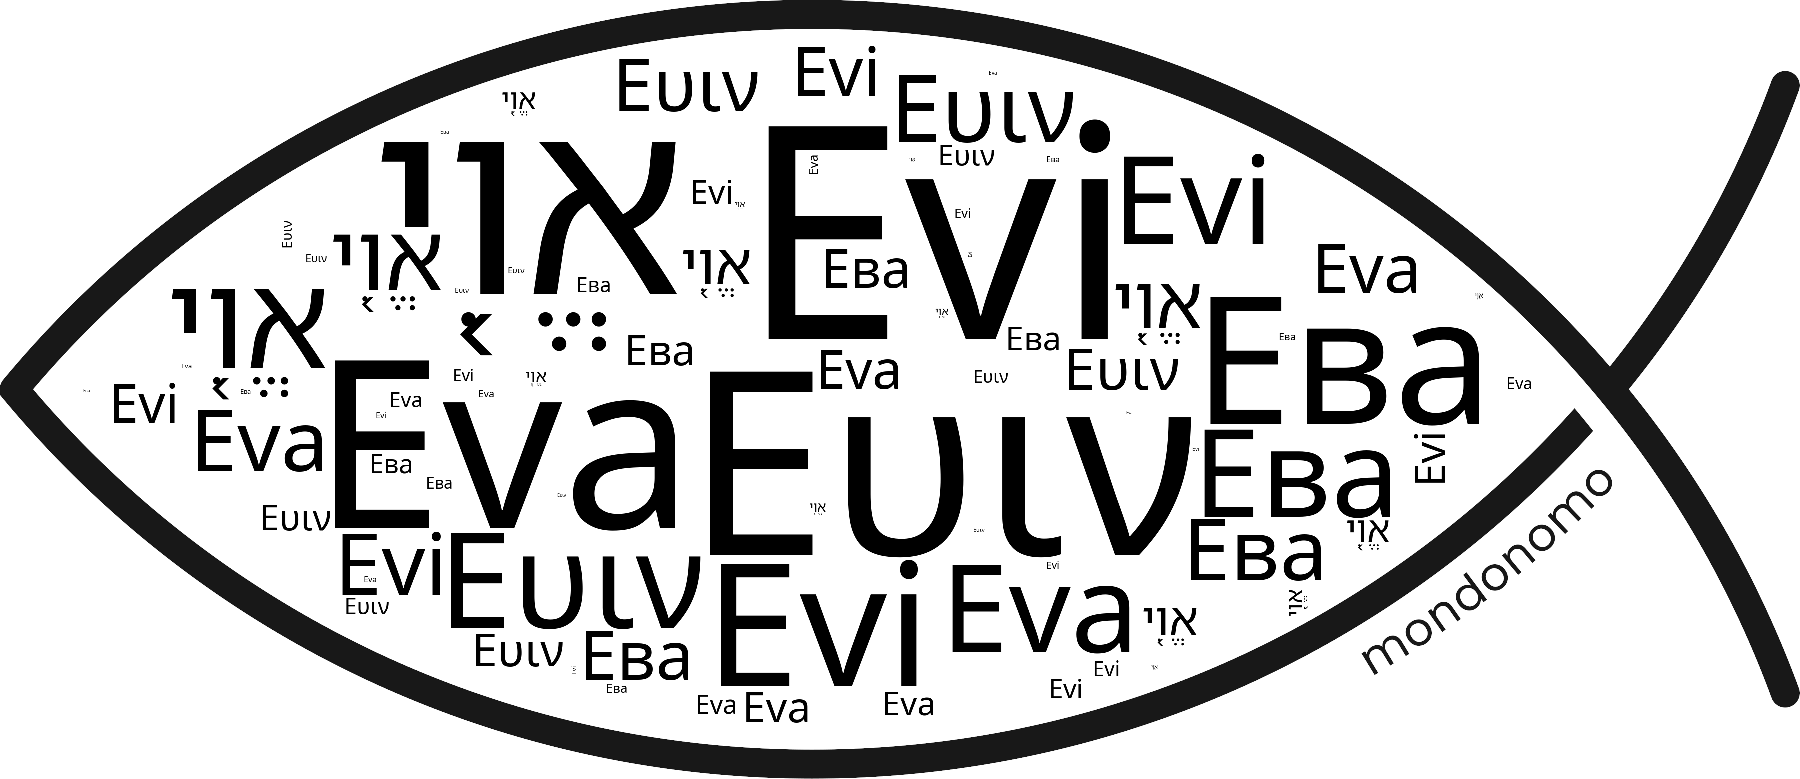 Name Evi in the world's Bibles